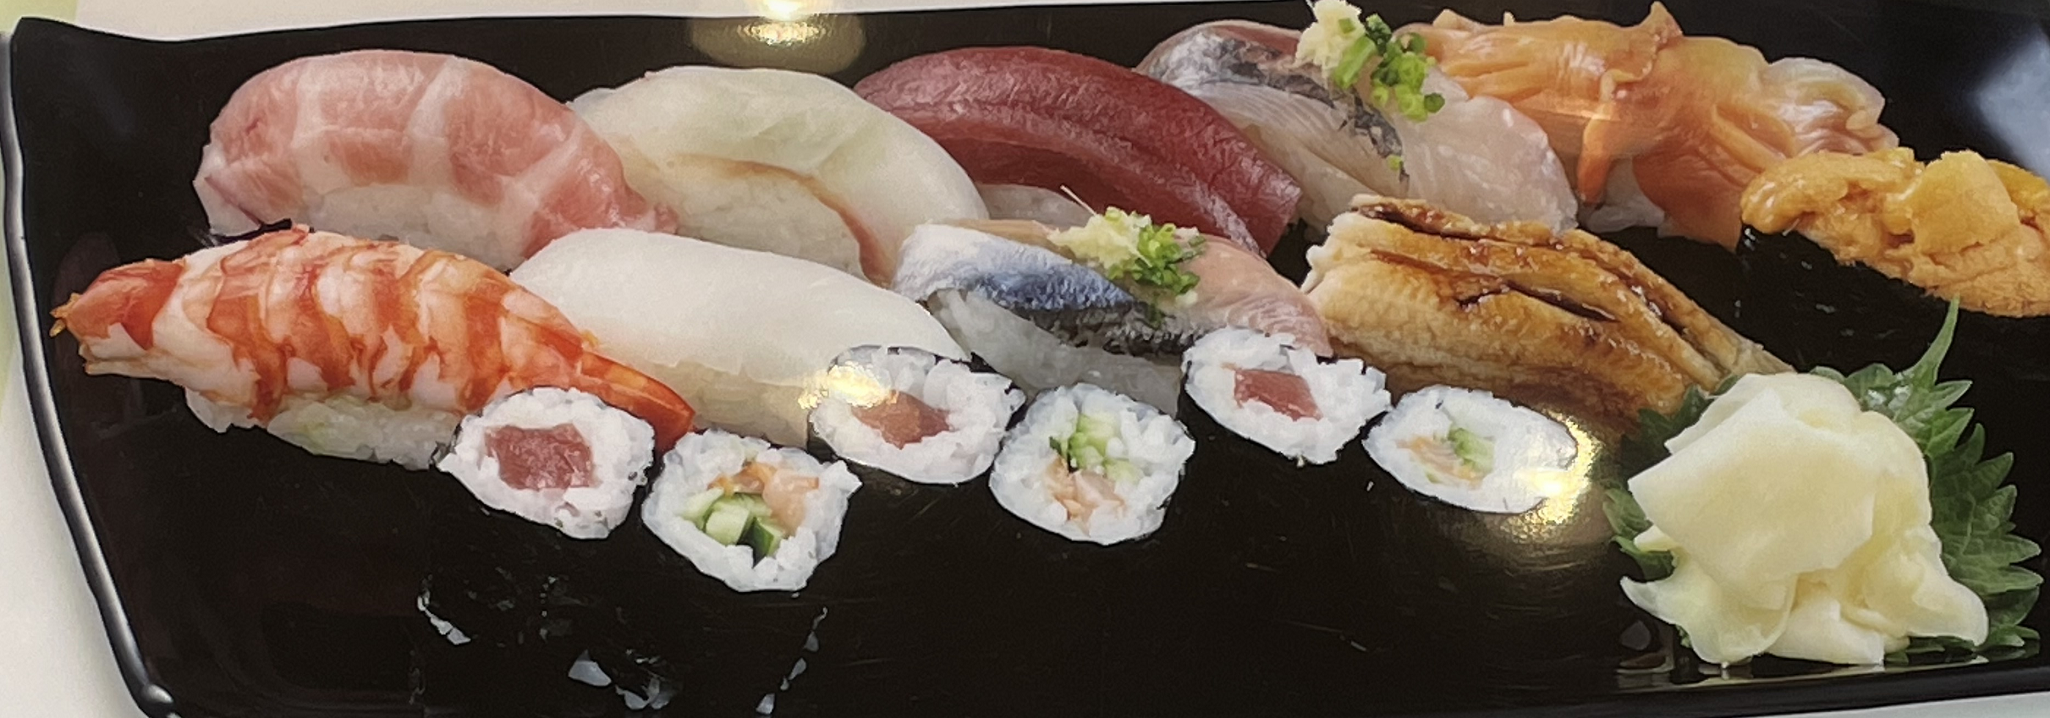 5% OFF for NAVITIME Users! Amazing Tuna Auction in Toyosu Market and Tsukiji Outer Market Tour